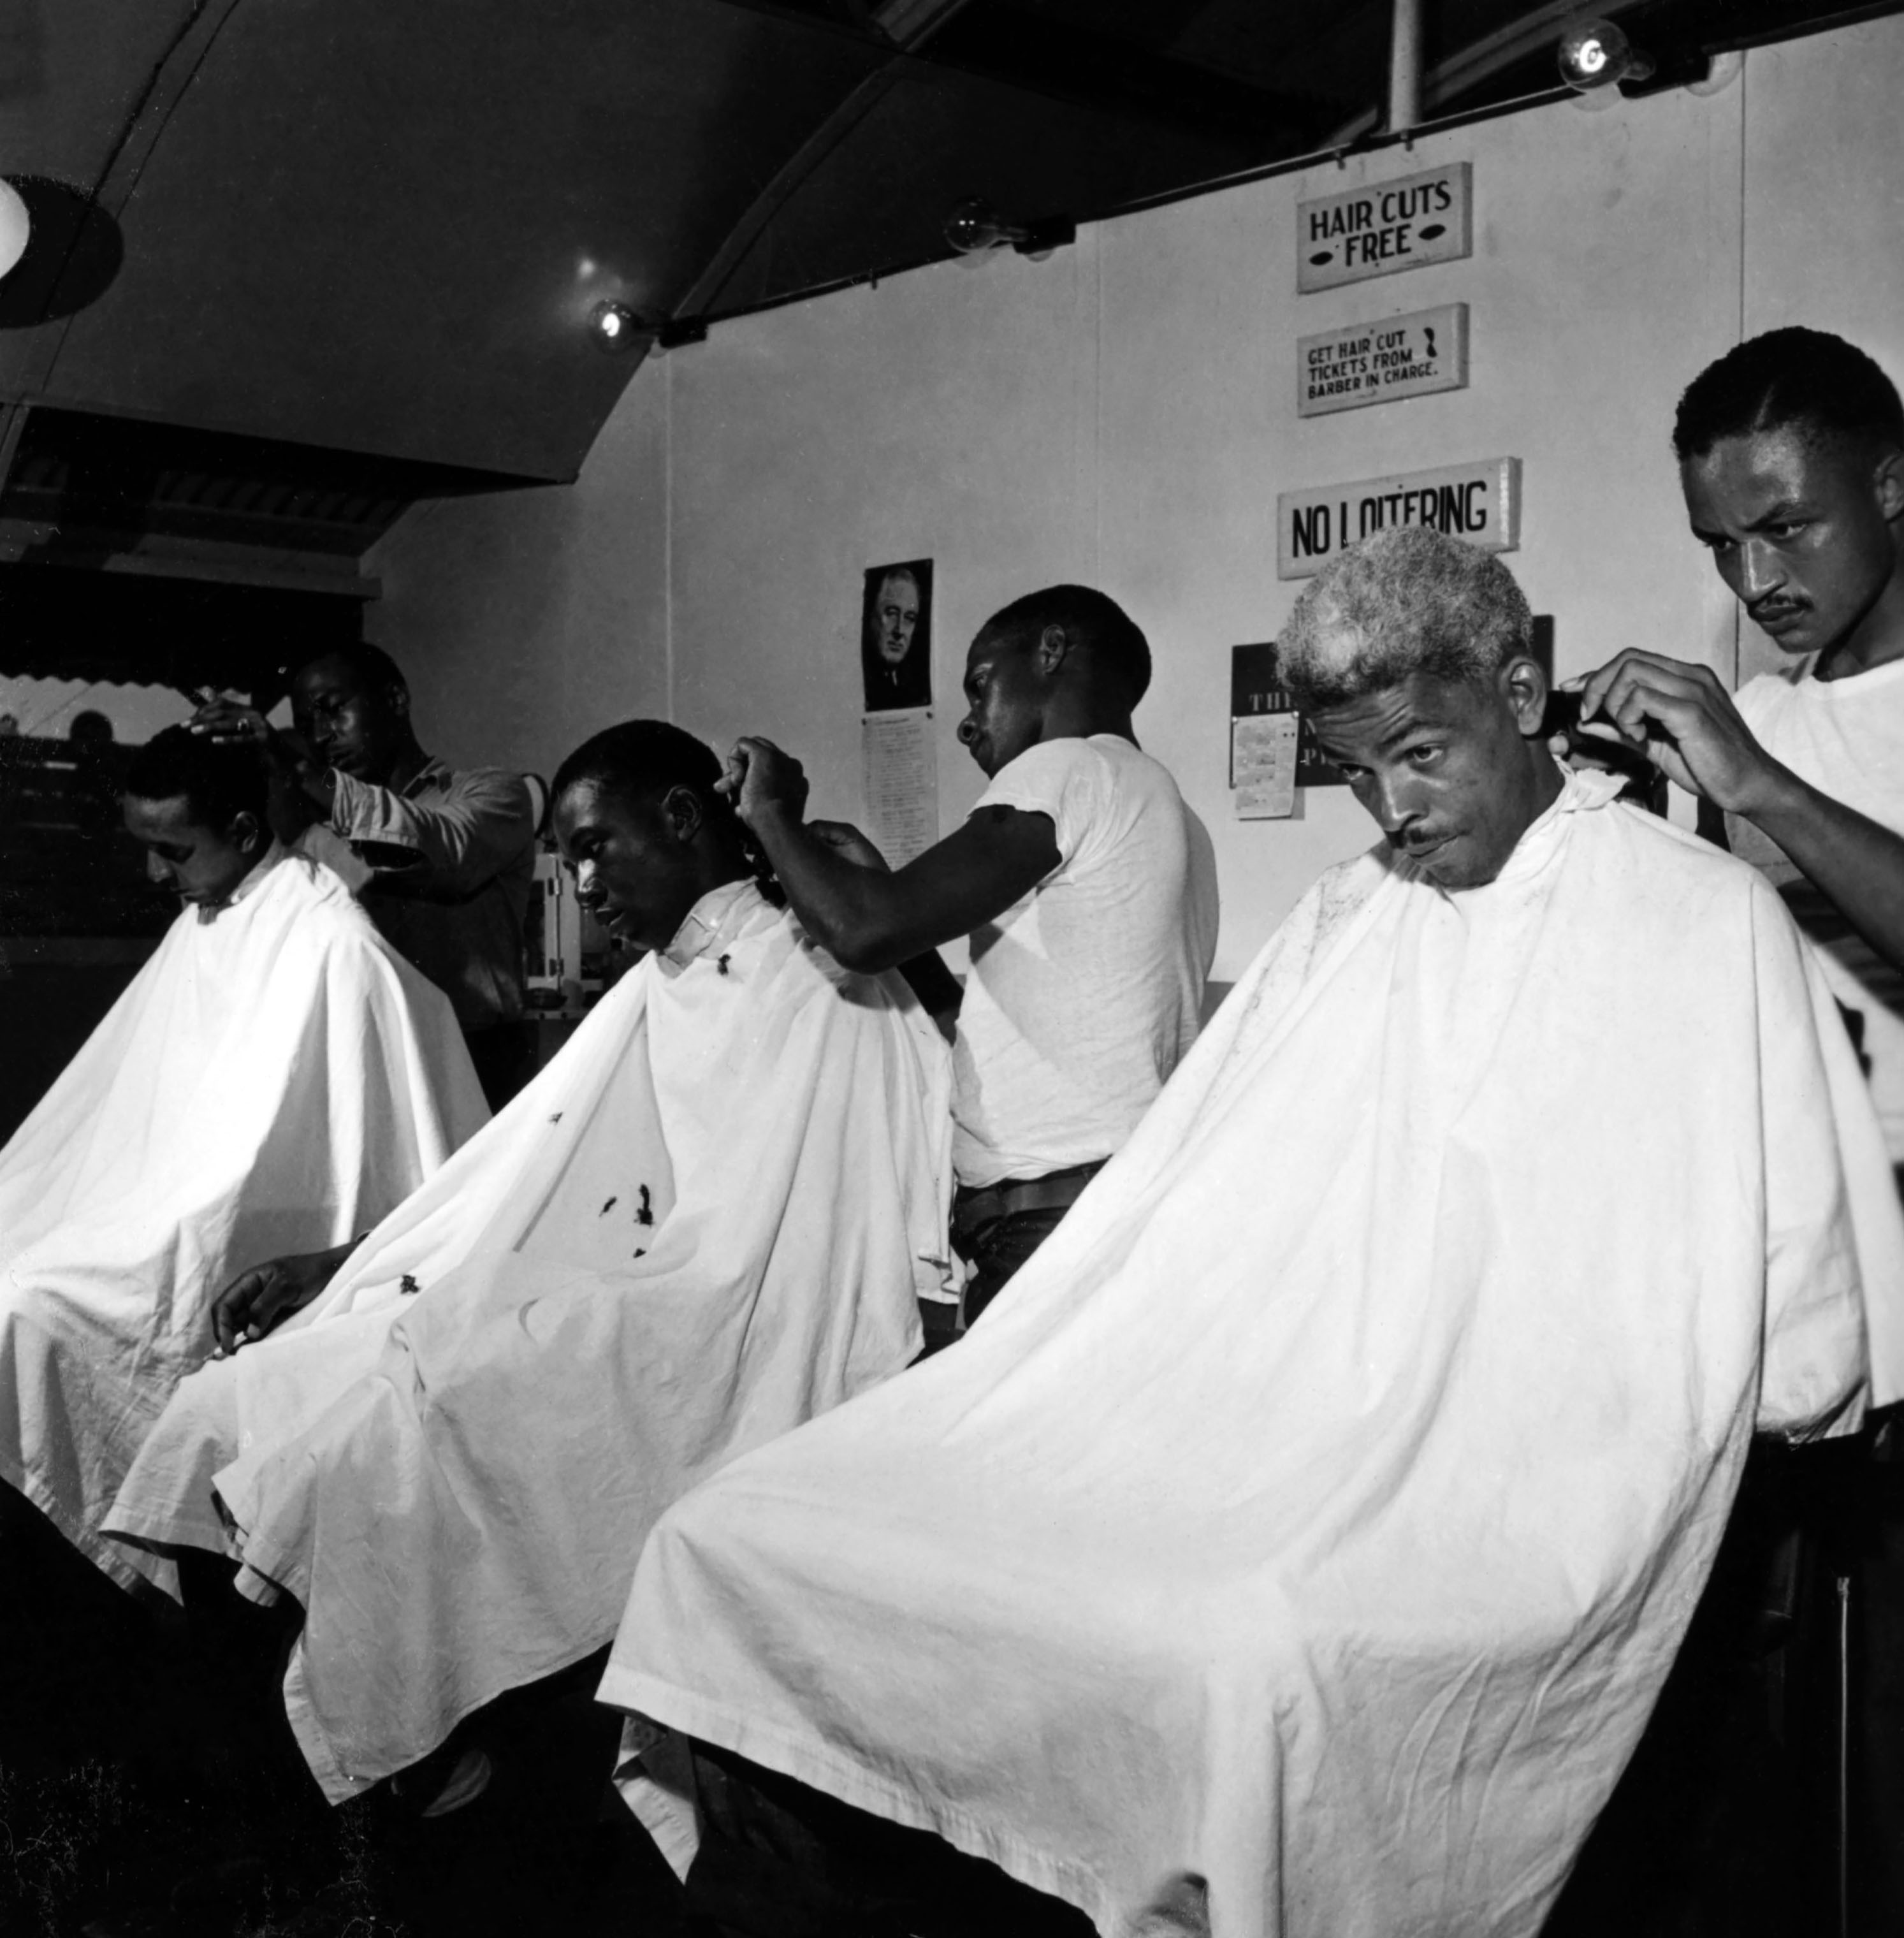 Sailors at the barbershop of the U.S. Naval Supply Depot on Guam, getting their hair cut at the base barbershop, in 1945. (Wayne Miller—Magnum Photos)